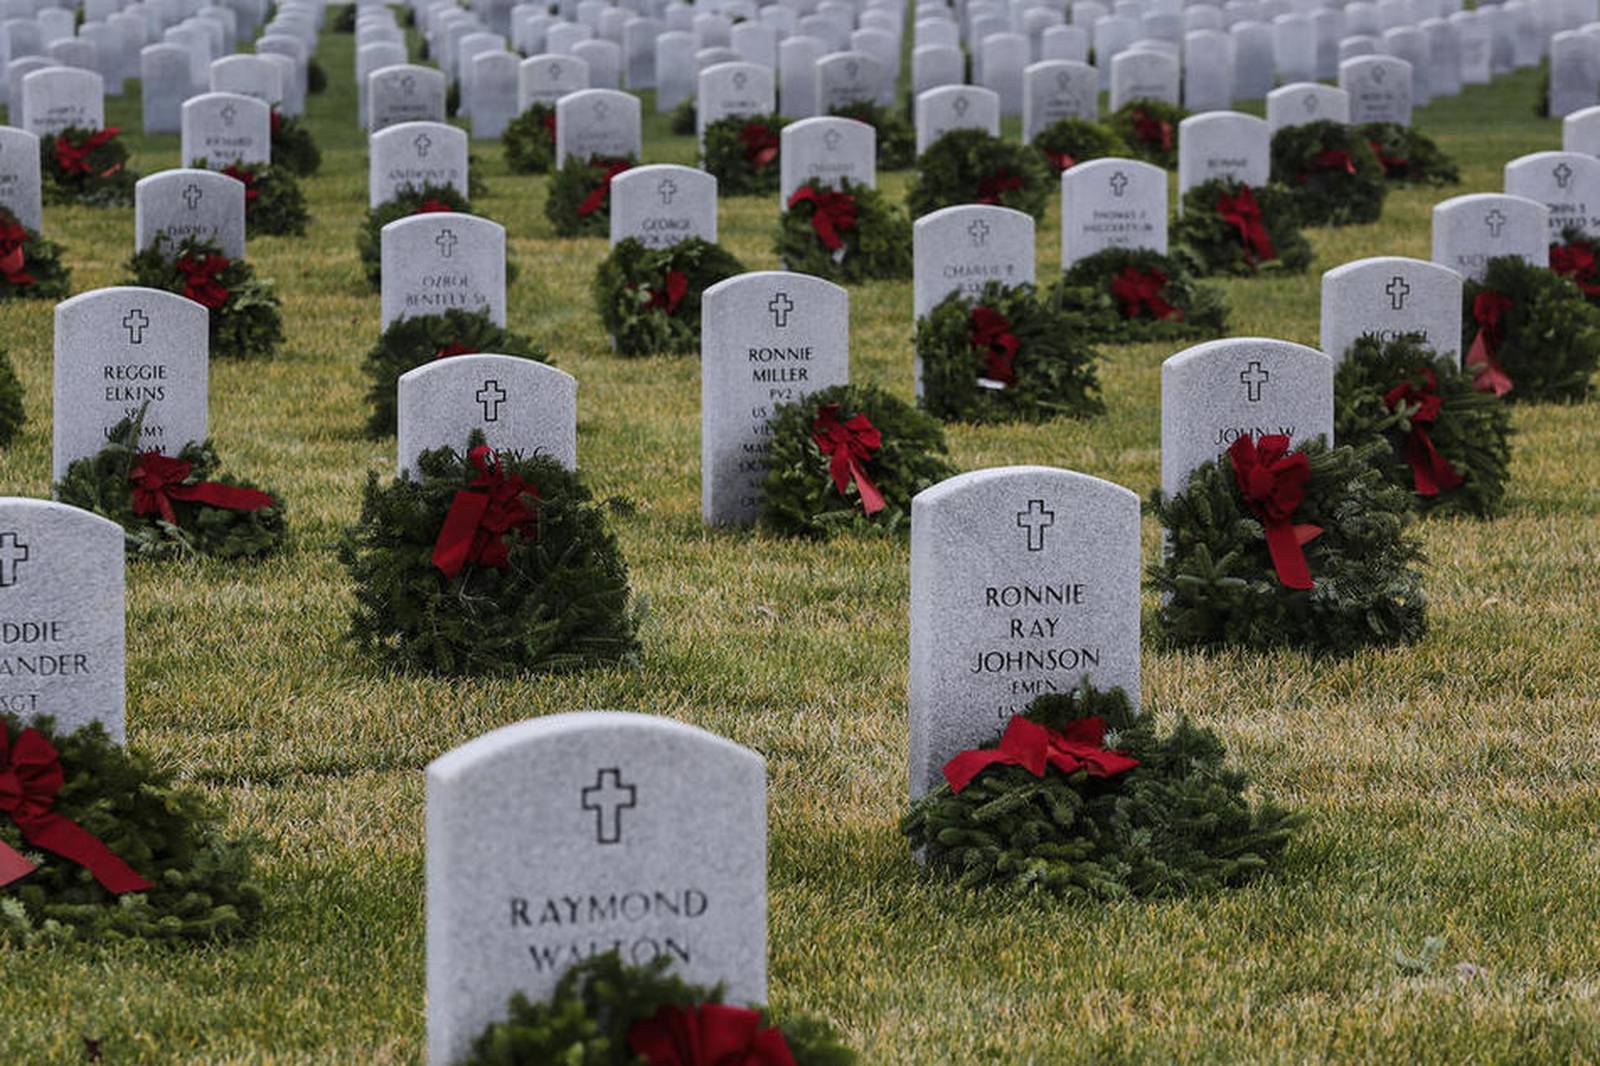 Wreaths Across America Day held at Abraham Lincoln National Cemetery in